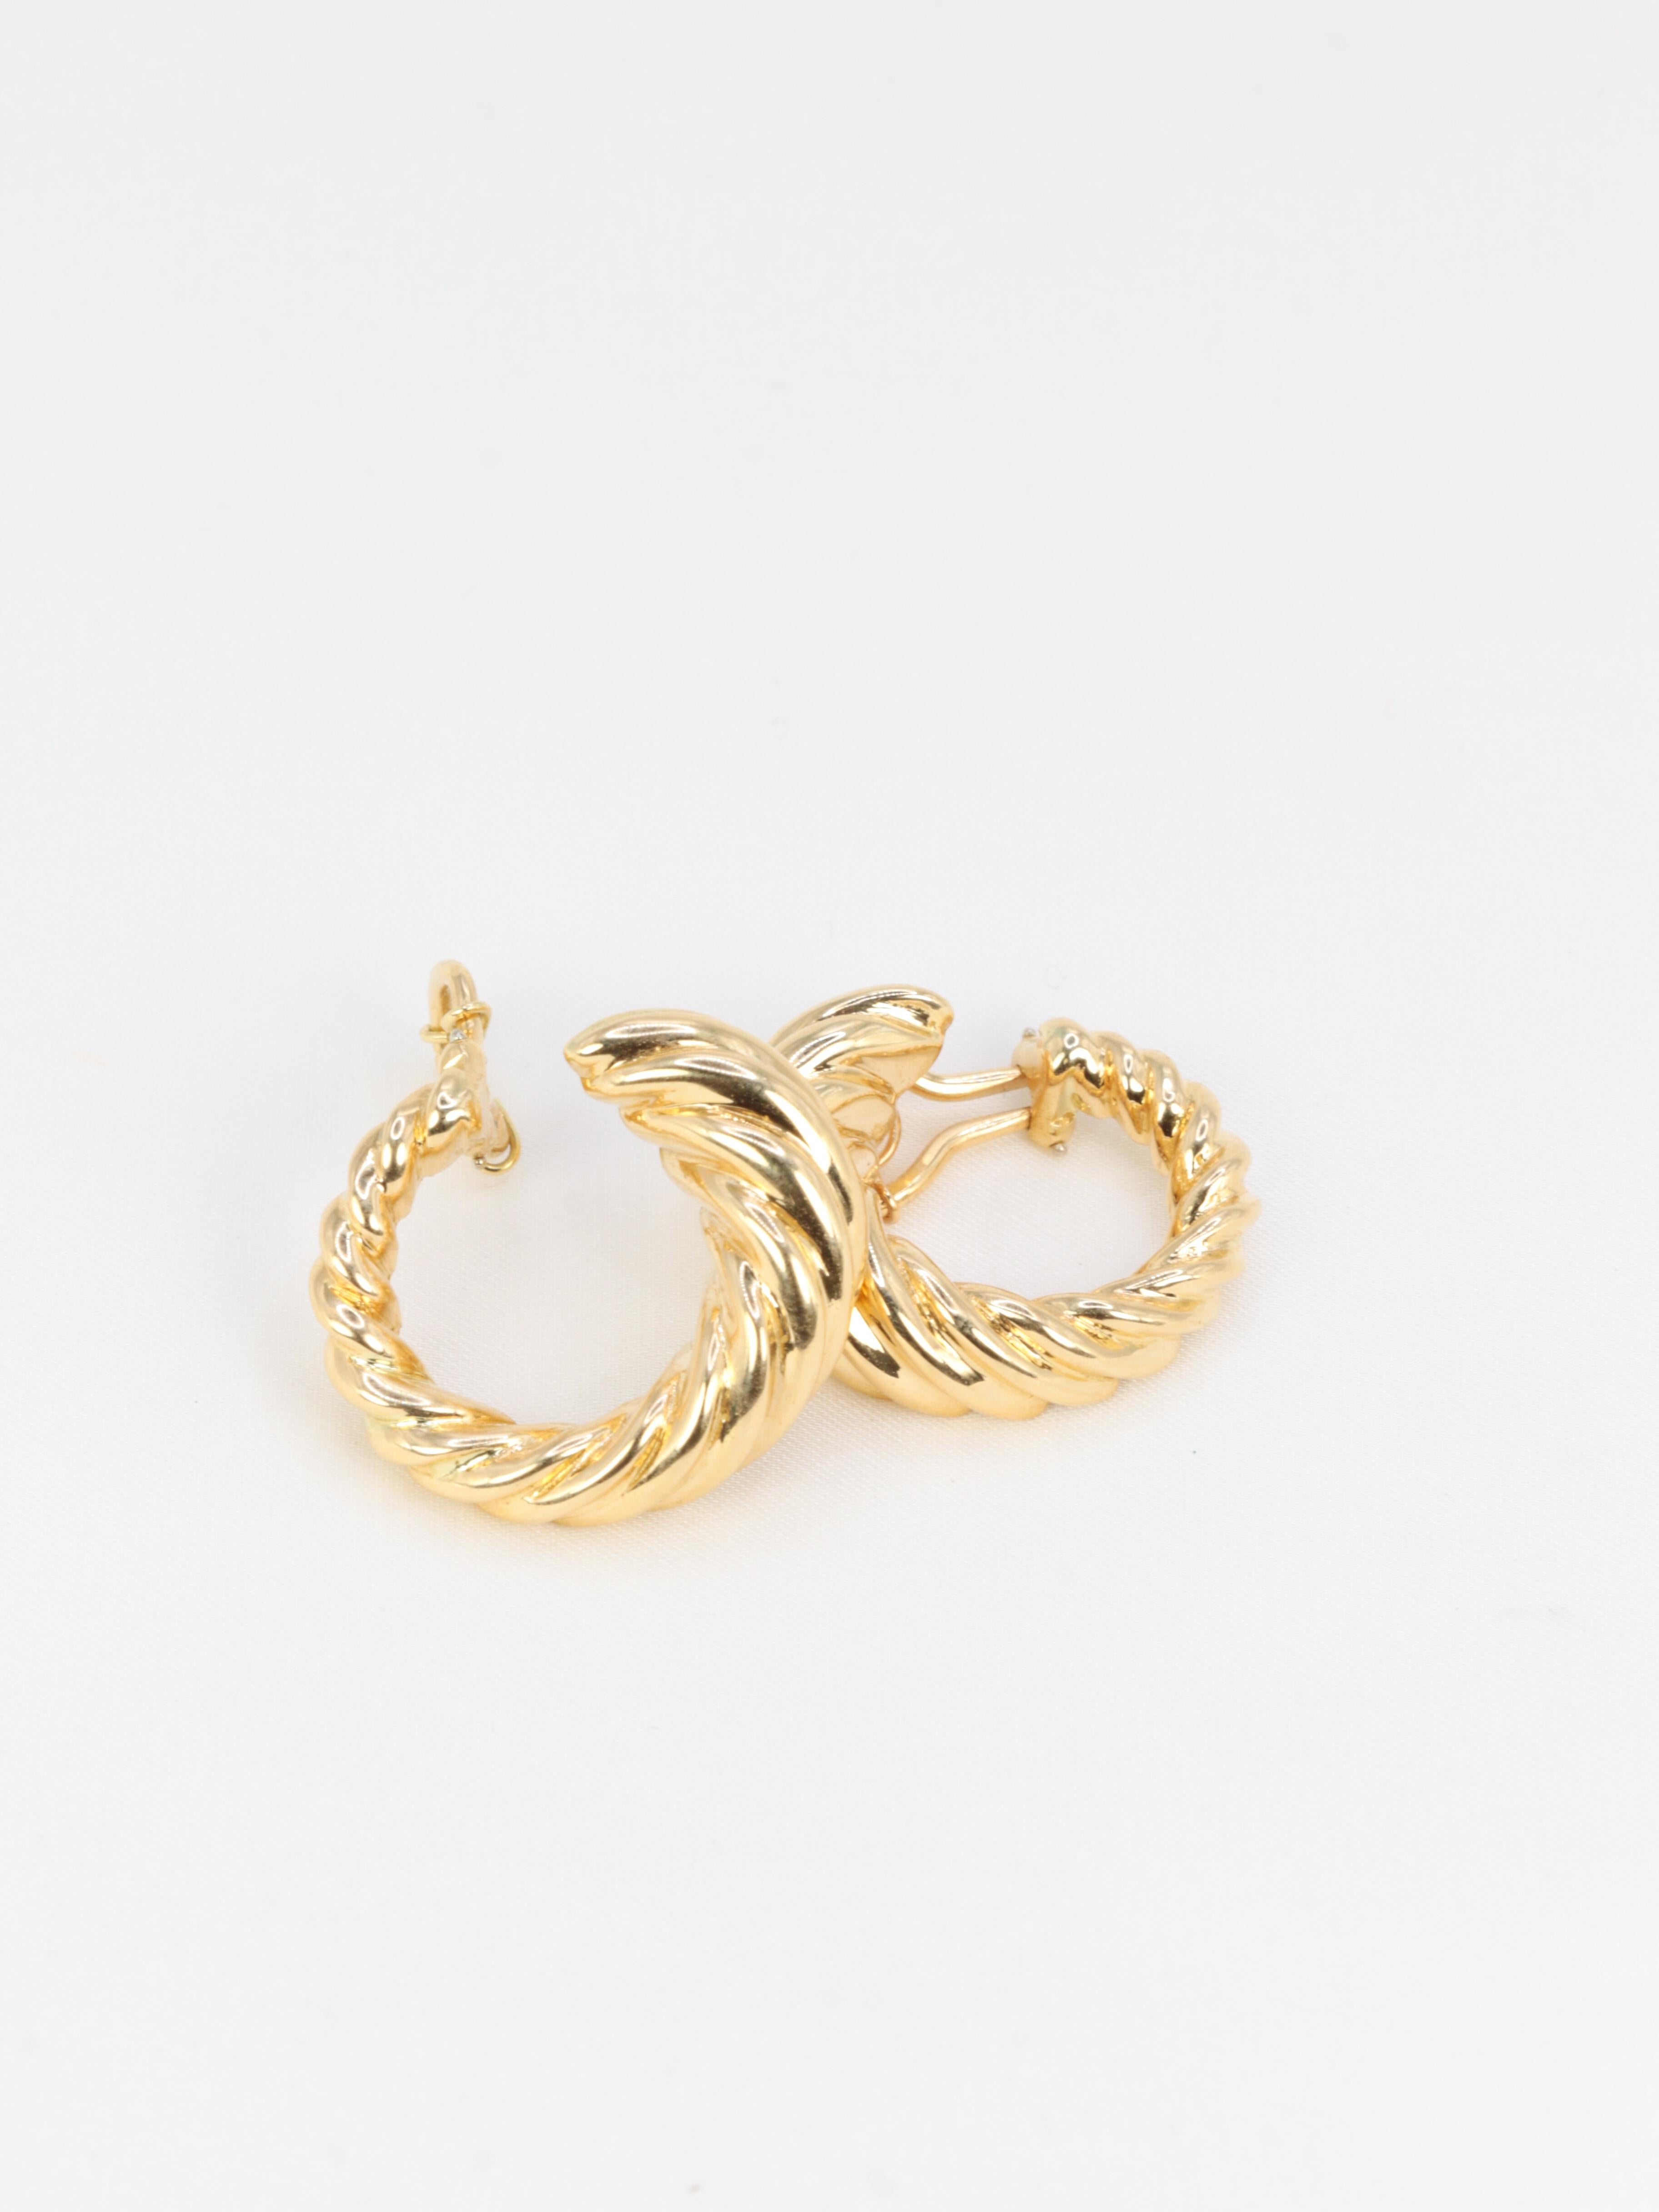 Pair of Vintage Ear Clips in Yellow Gold 4